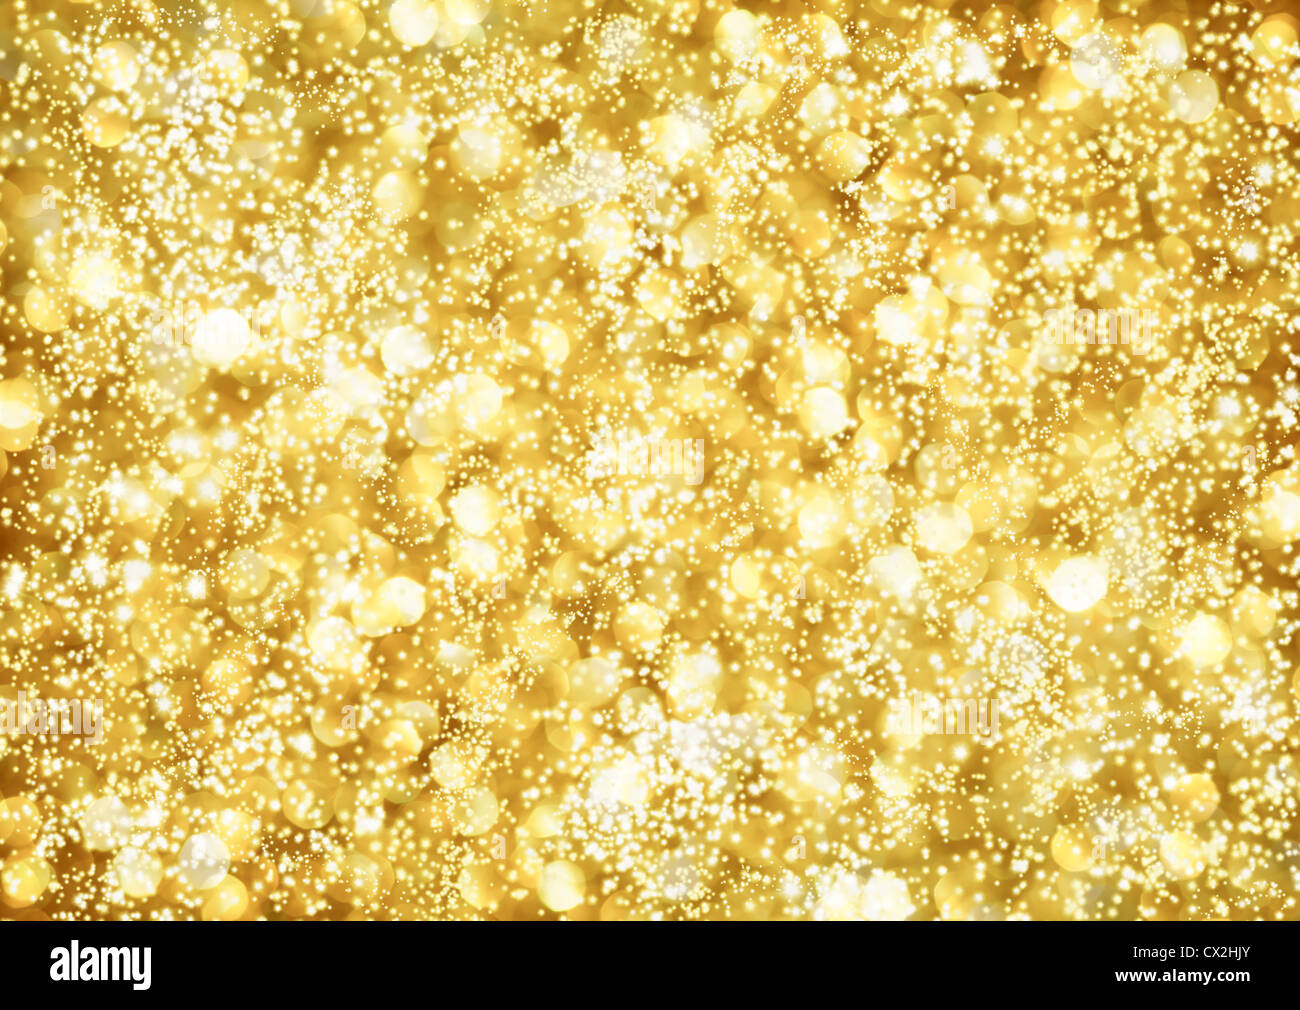 Glitters Photos, Download The BEST Free Glitters Stock Photos & HD Images